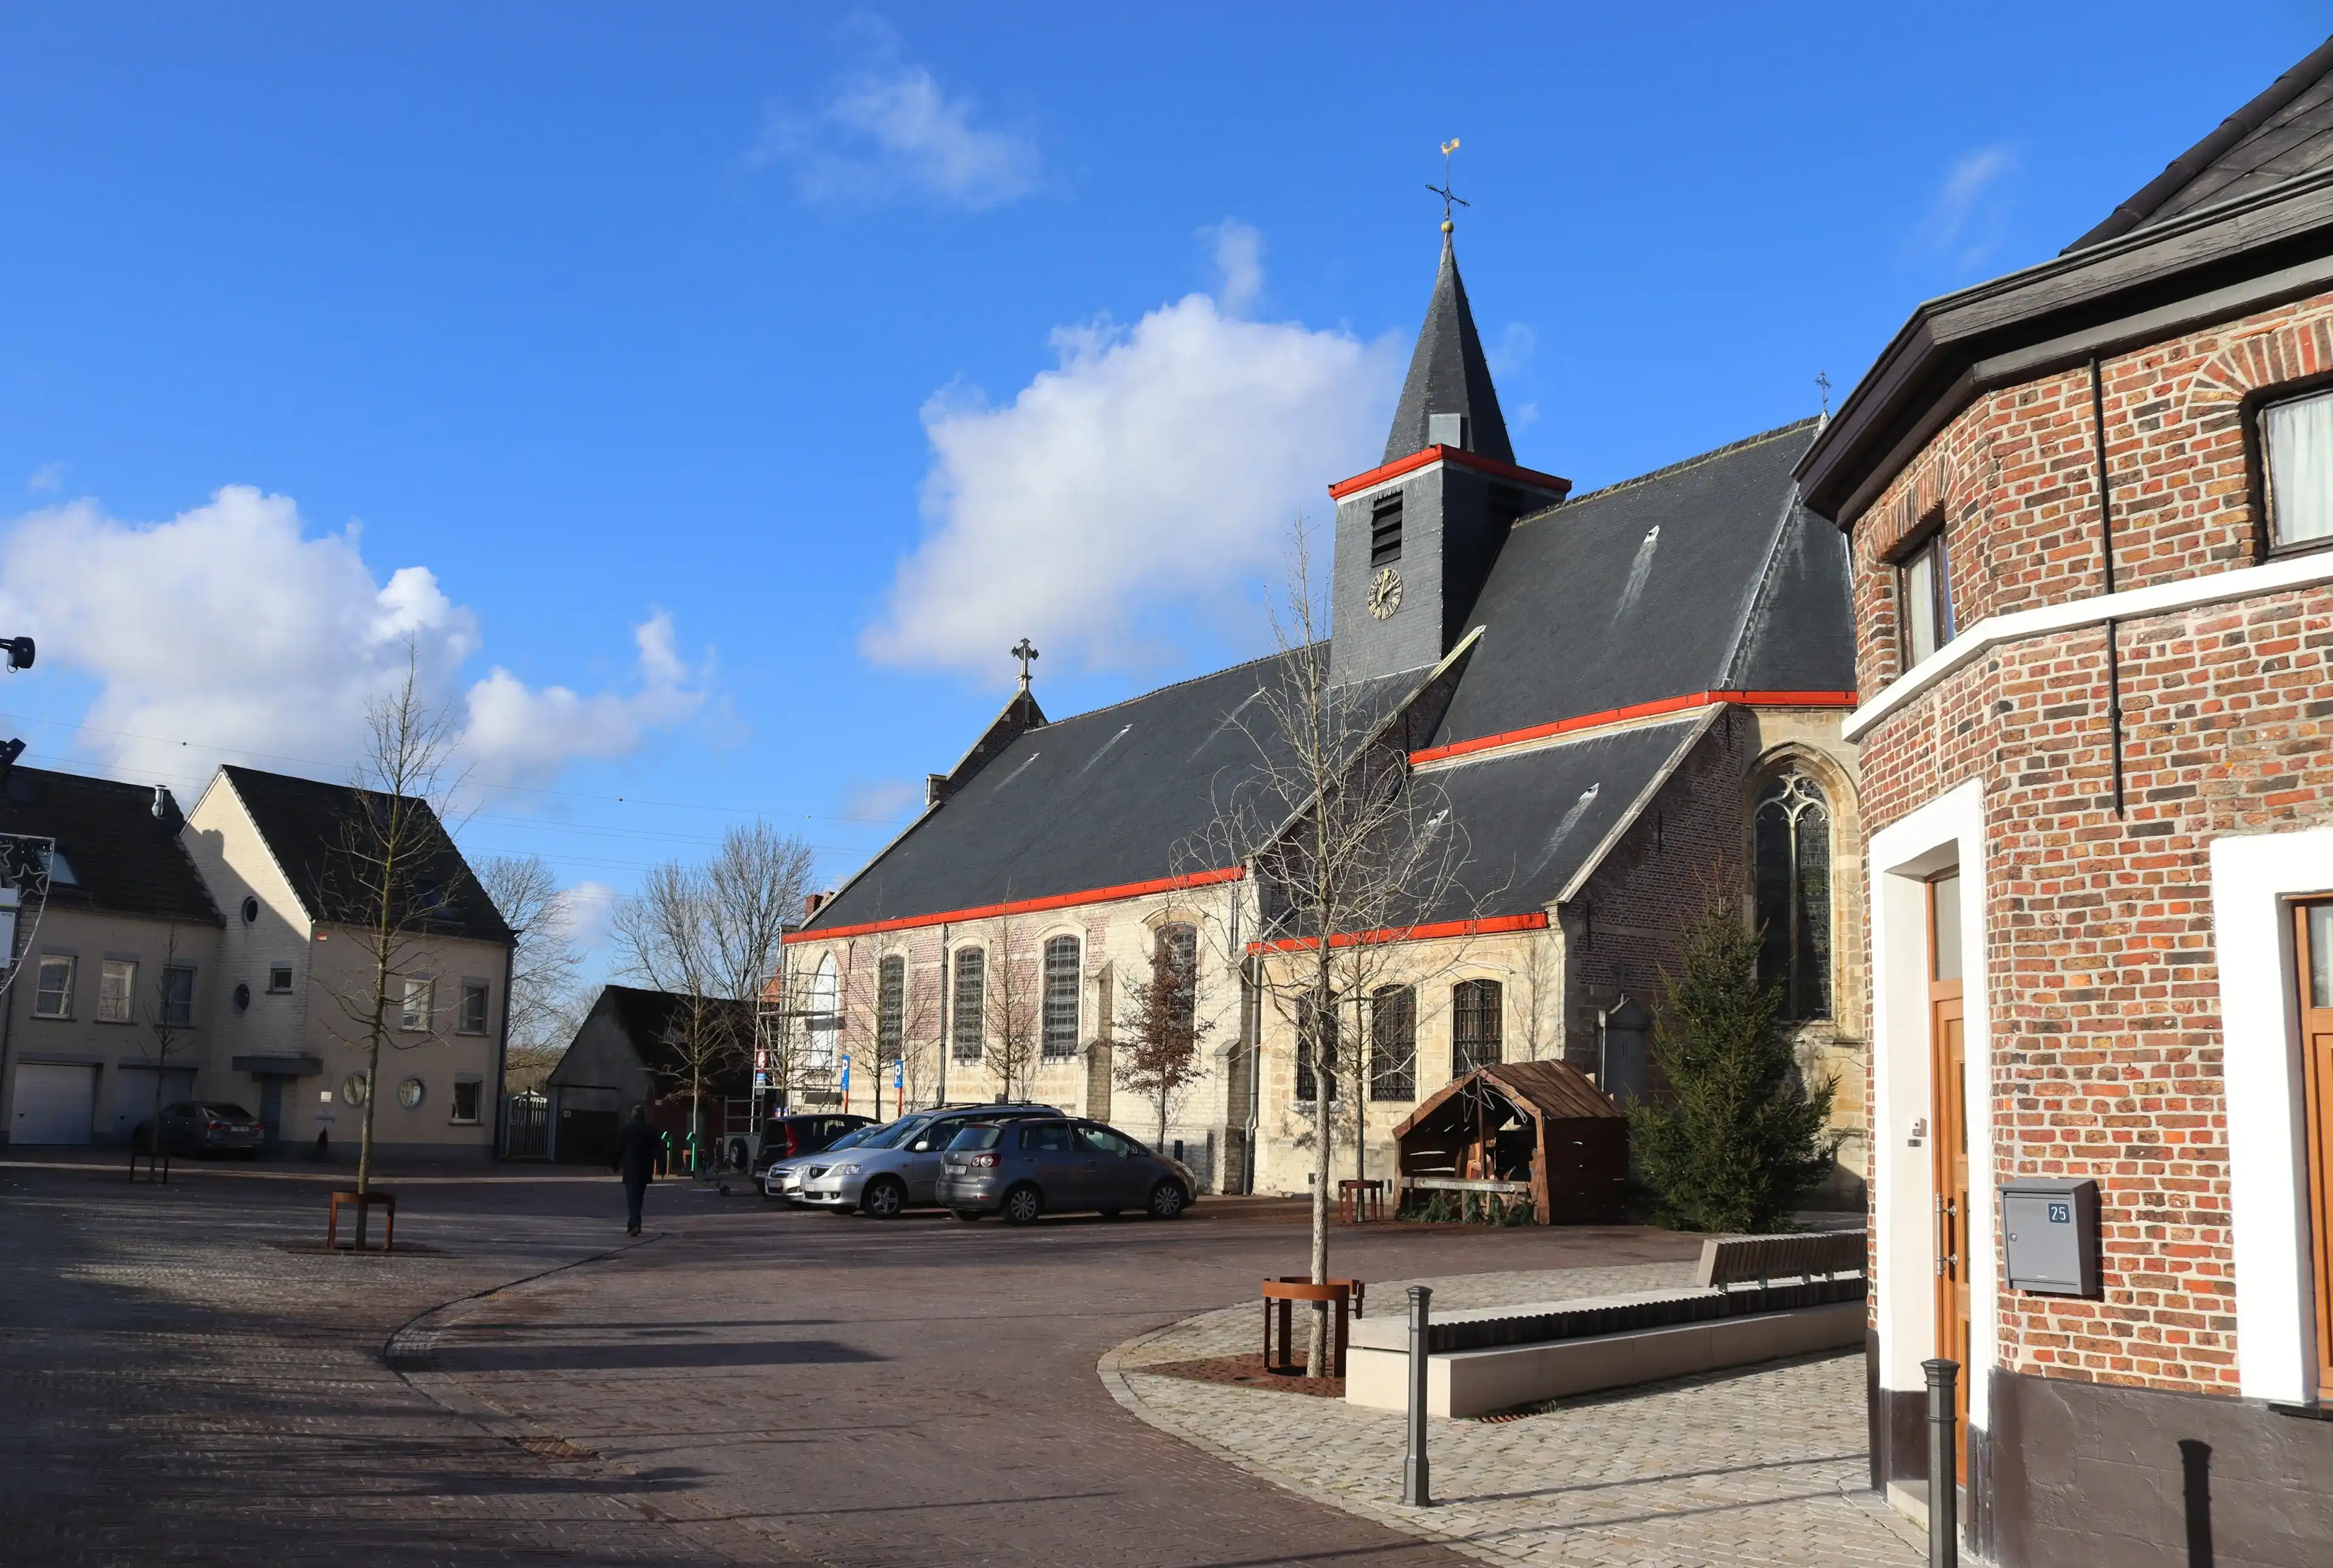 LEBBEKE, BELGIUM, 6 JANUARY 2022: The village center and church of Denderbelle near Lebbeke in Flanders. Denderbelle is a village in East Flanders next to the river Dender with a population of 2200.